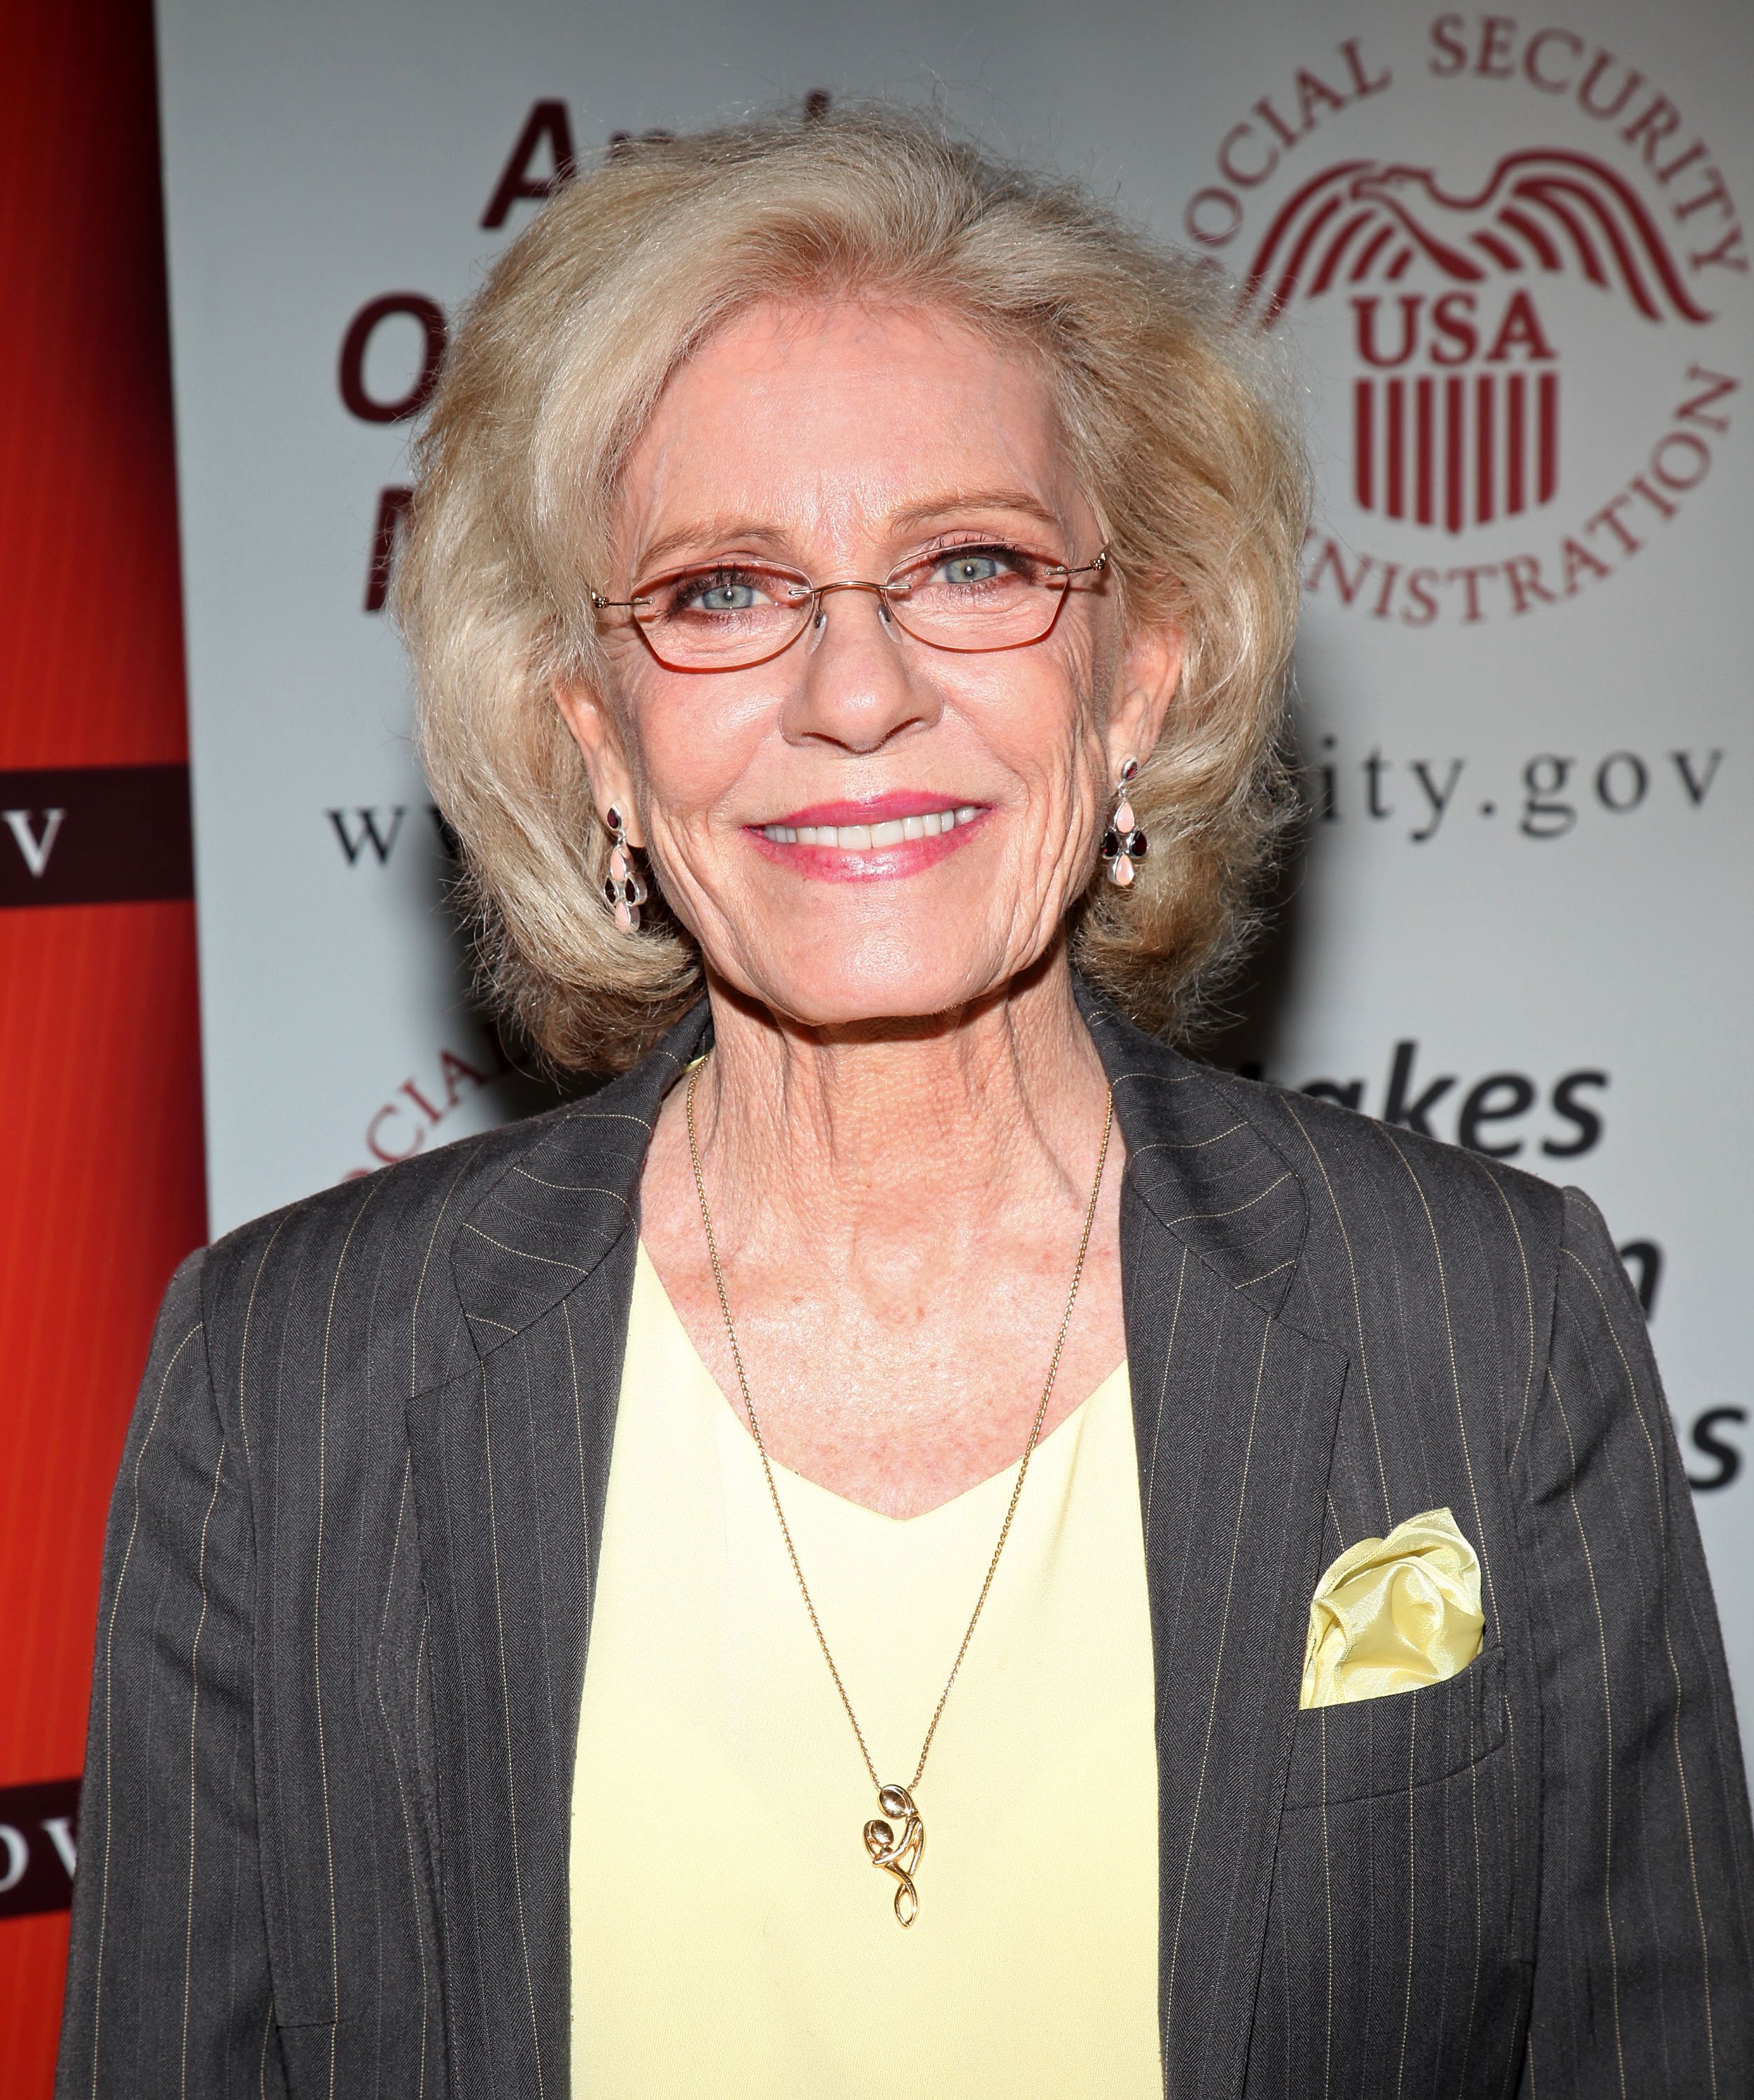 Patty Duke at the Social Security reunion of the cast of "The Patty Duke Show" on March 23, 2010. | Source: Getty Images